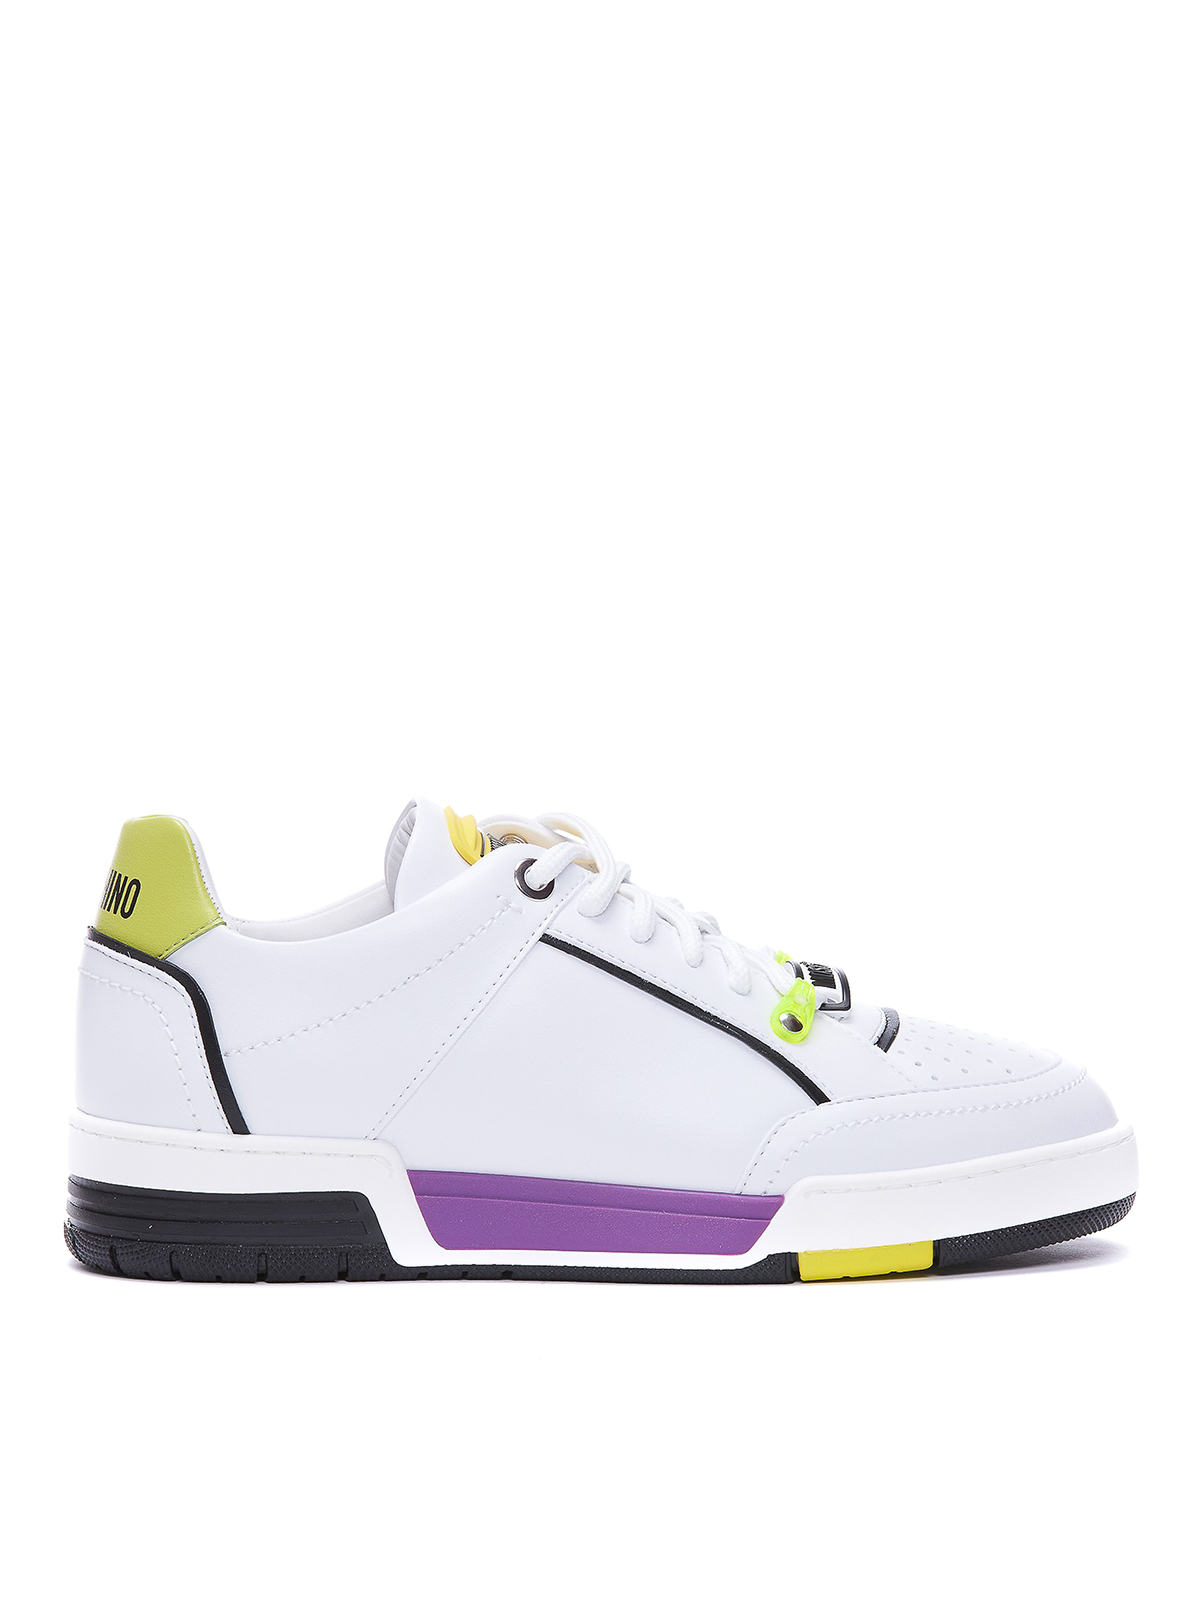 Trainers Moschino - Tech fabric sneakers - MB15614G1GG4010A | iKRIX.com